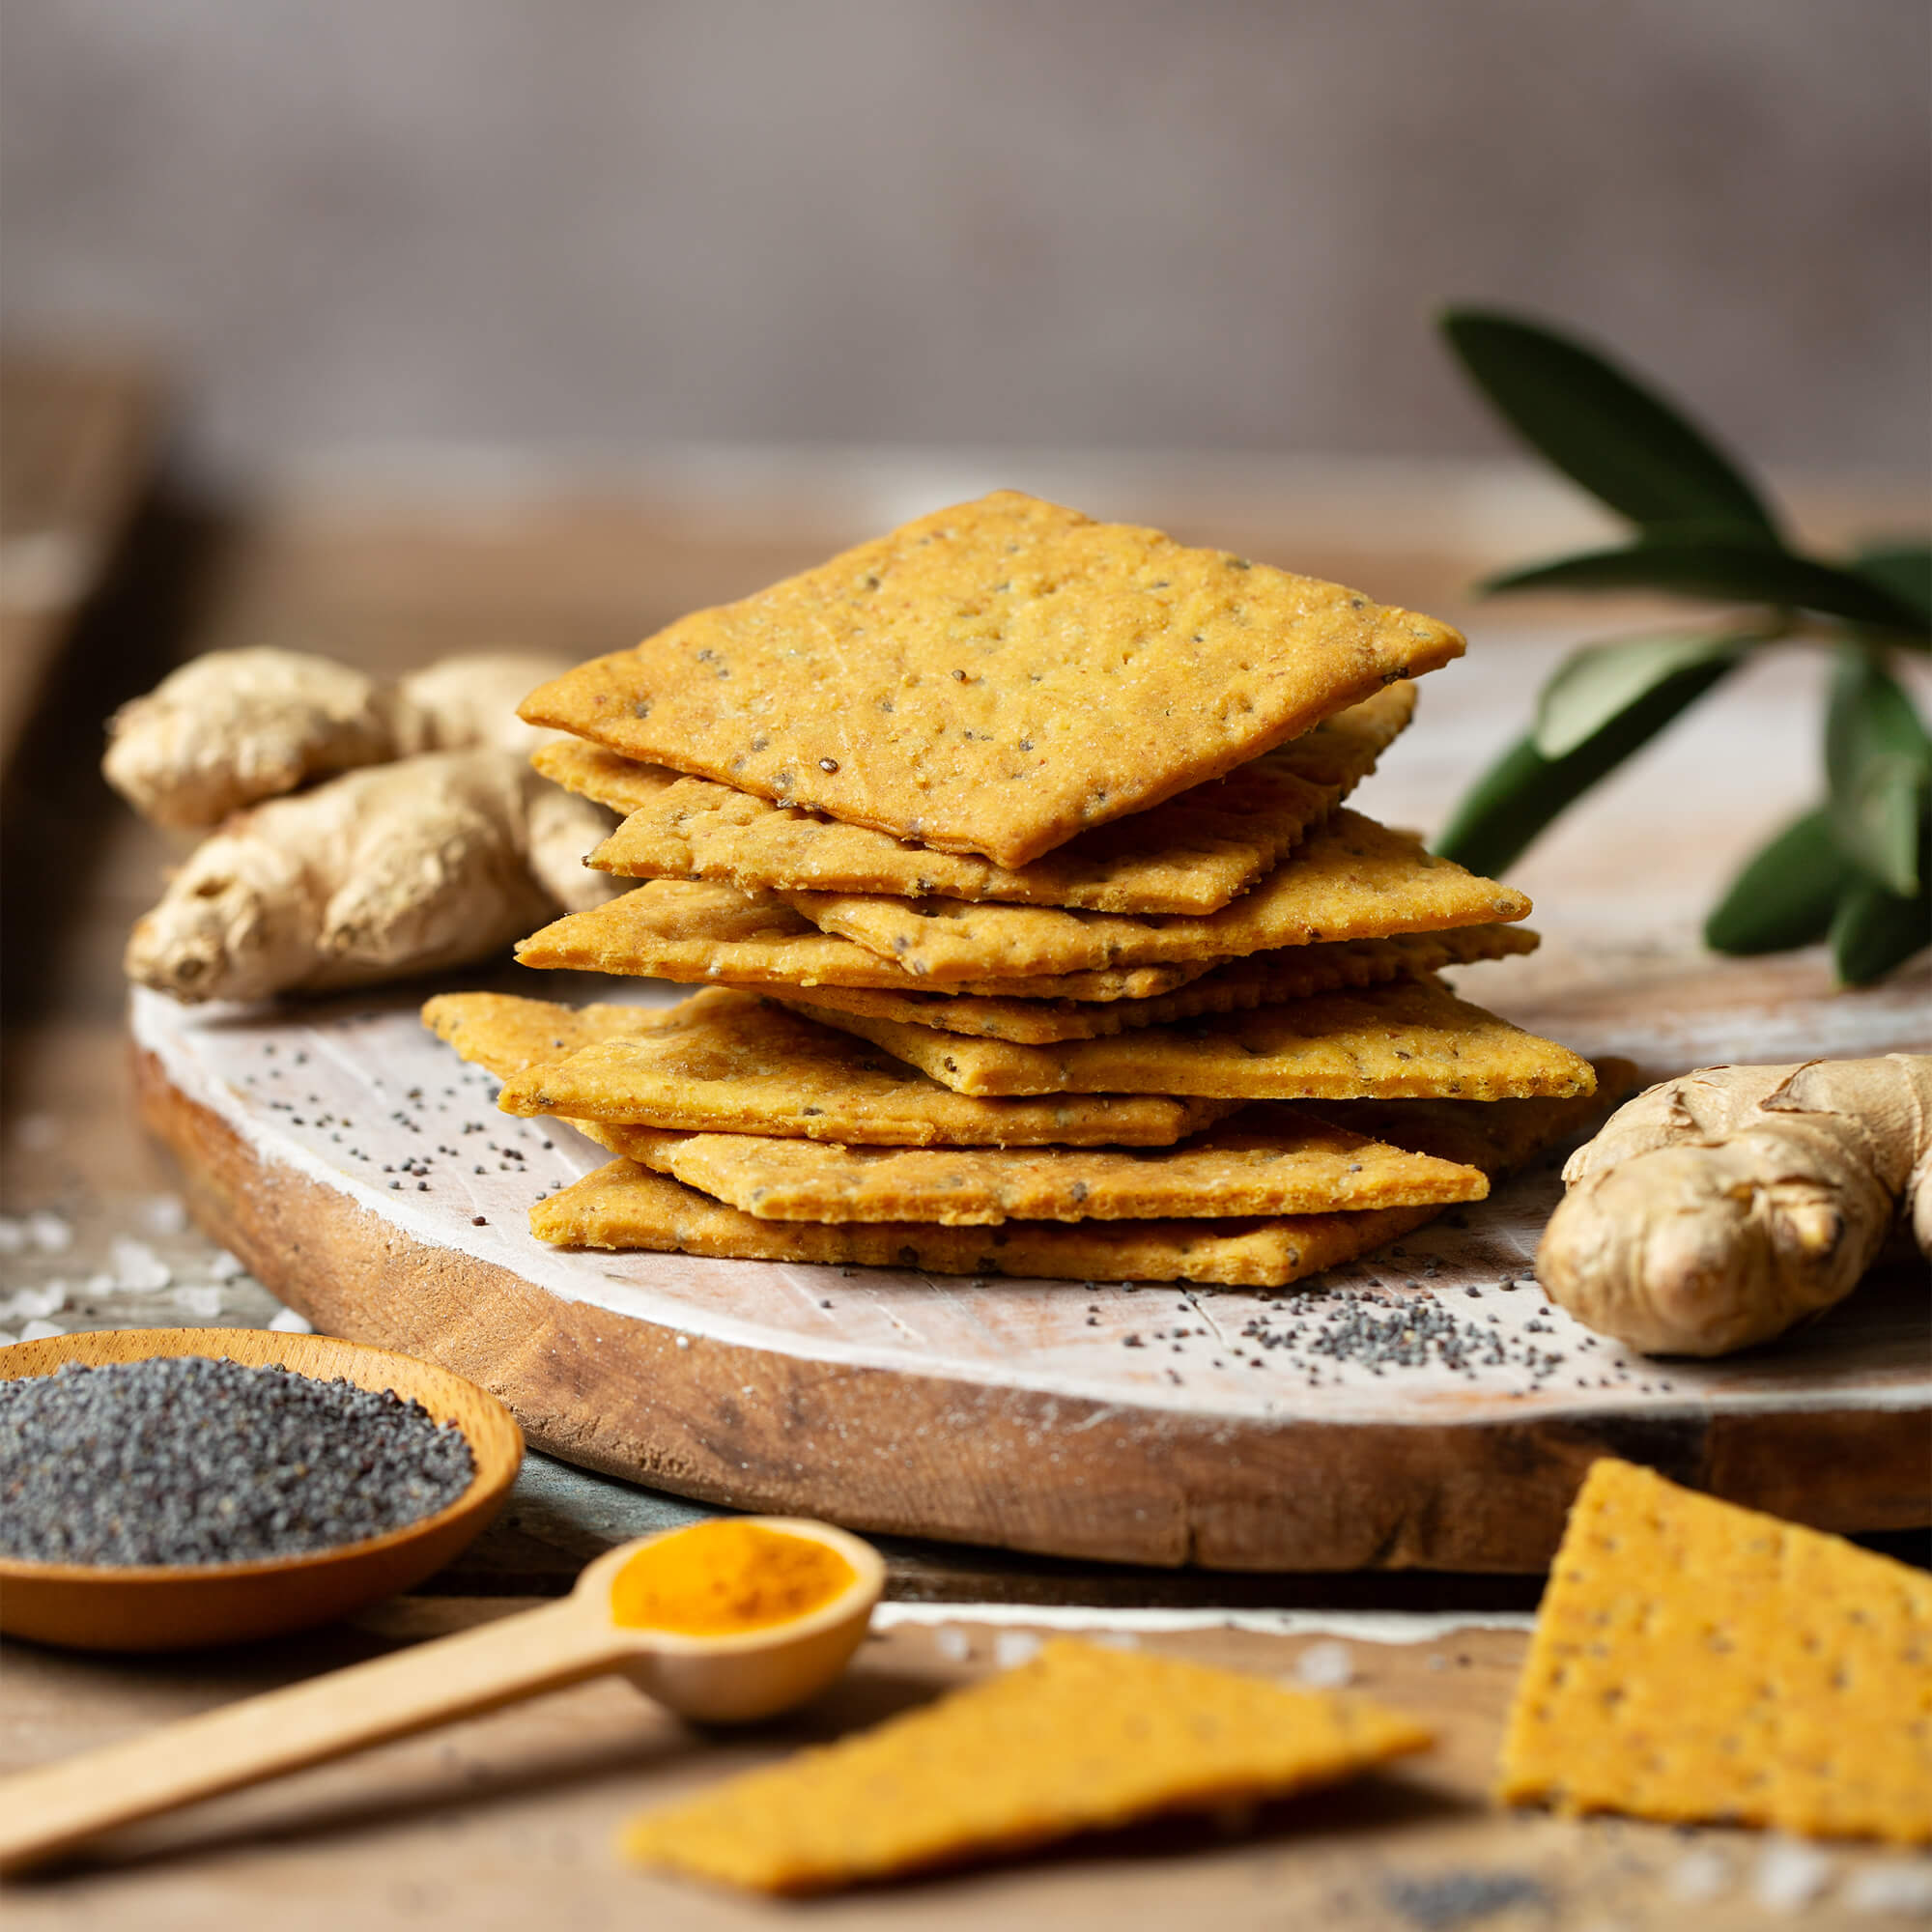 Turmeric crackers with poppy seeds